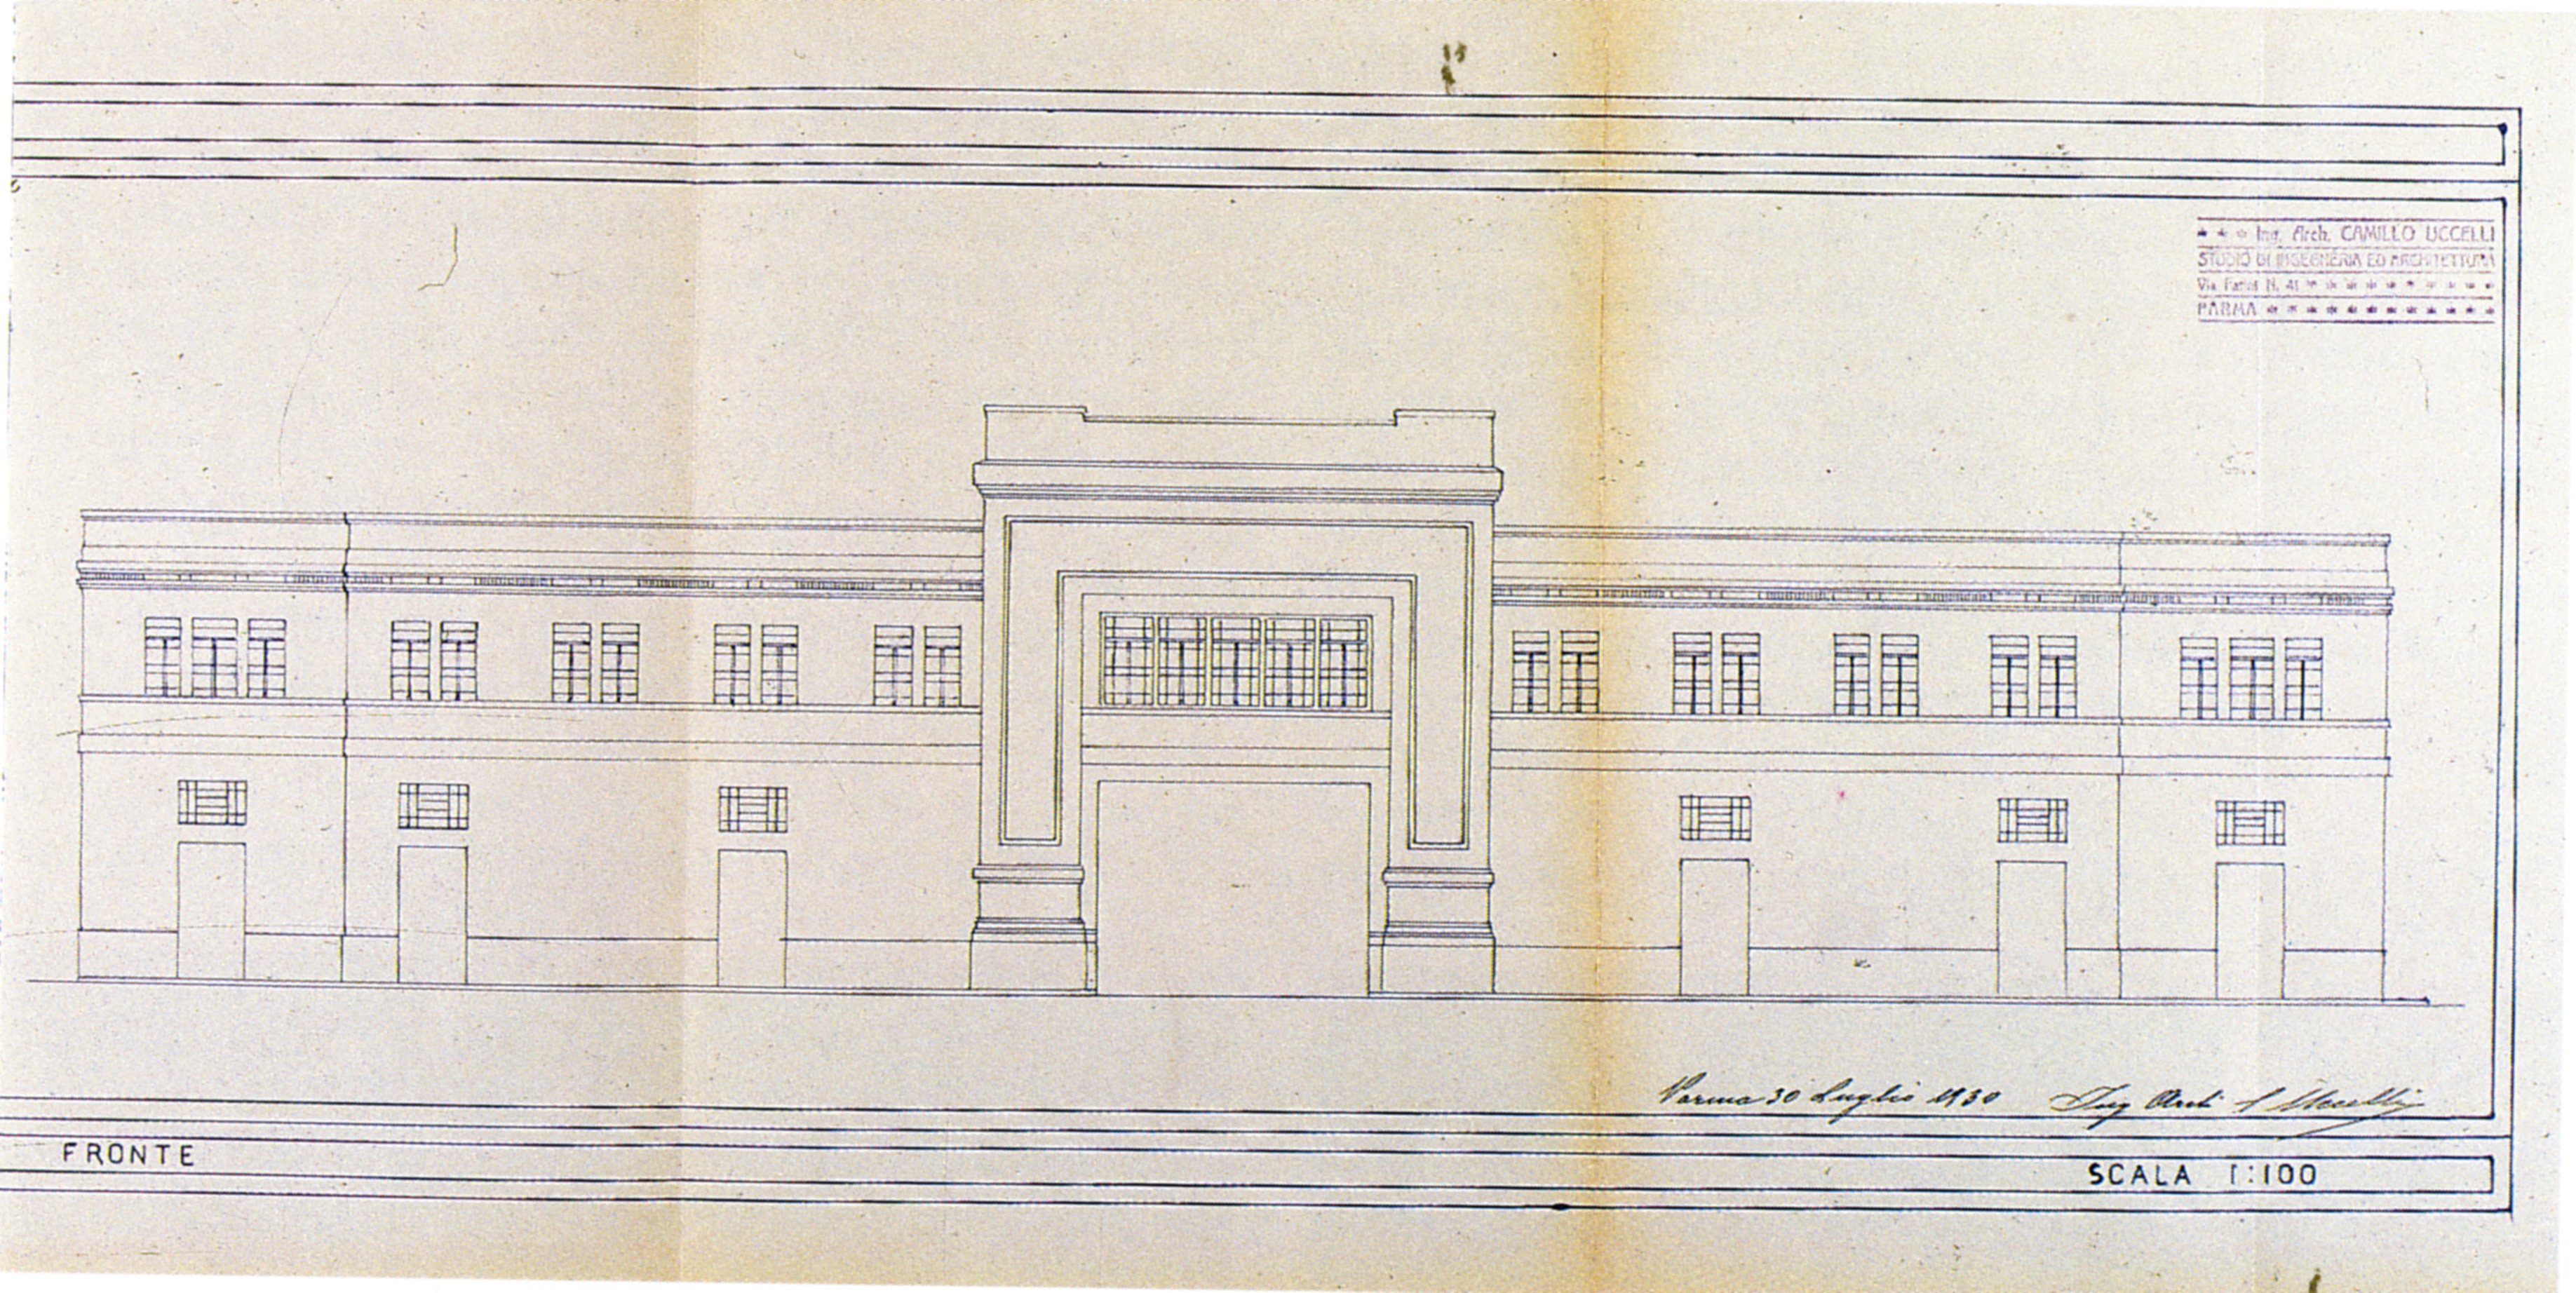 Camillo Uccelli, Design for the Bakery, 1930: west perspective design [ASCPR, building licenses, 1922/293].